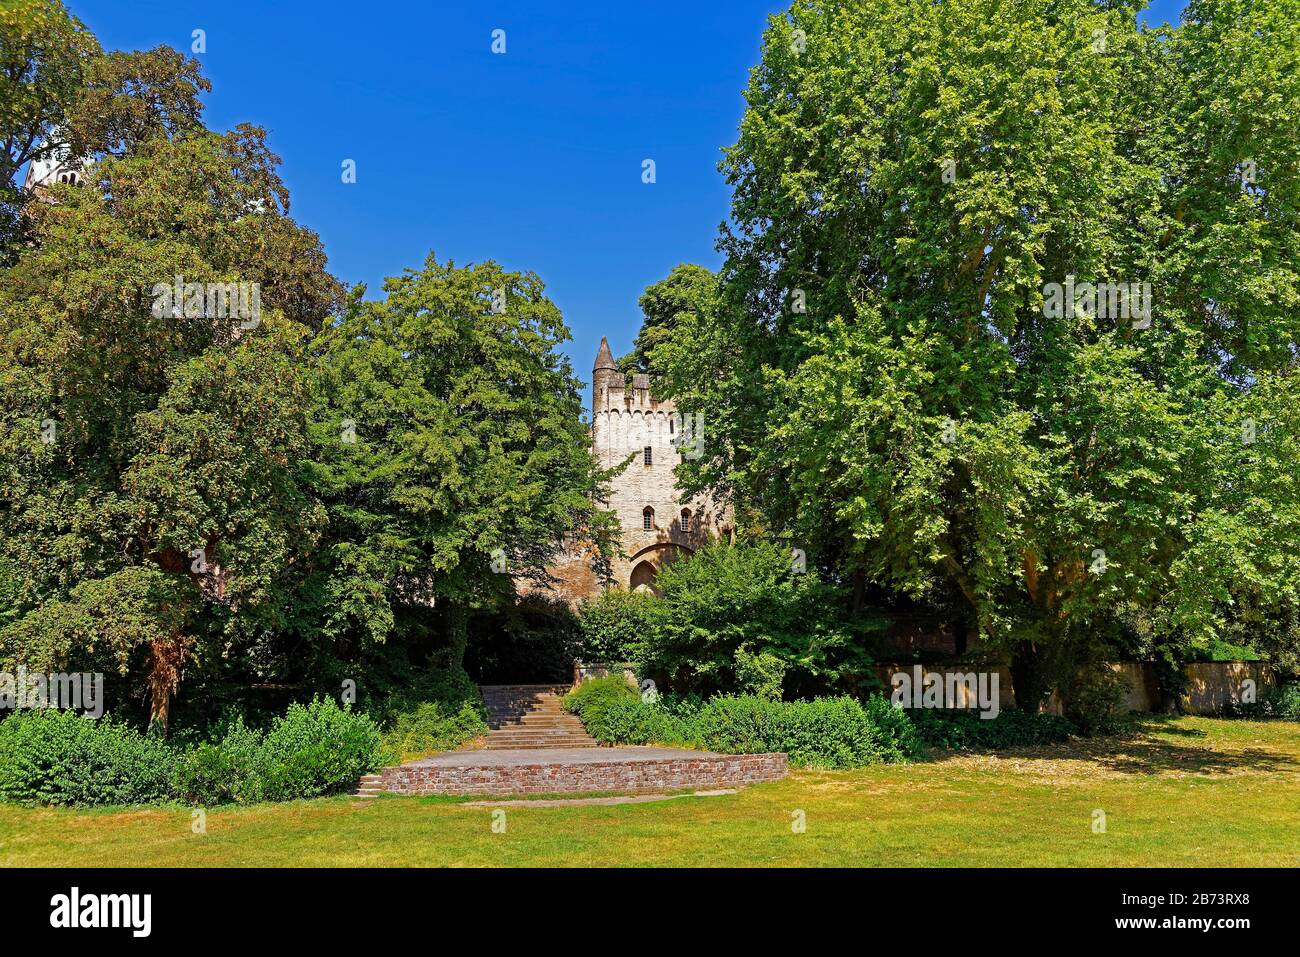 Germany, Rhineland-Palatinate, Speyer, cathedral place, SchUM town, moor turret, wall tower, formerly part of the city fortification, cathedral garden Stock Photo